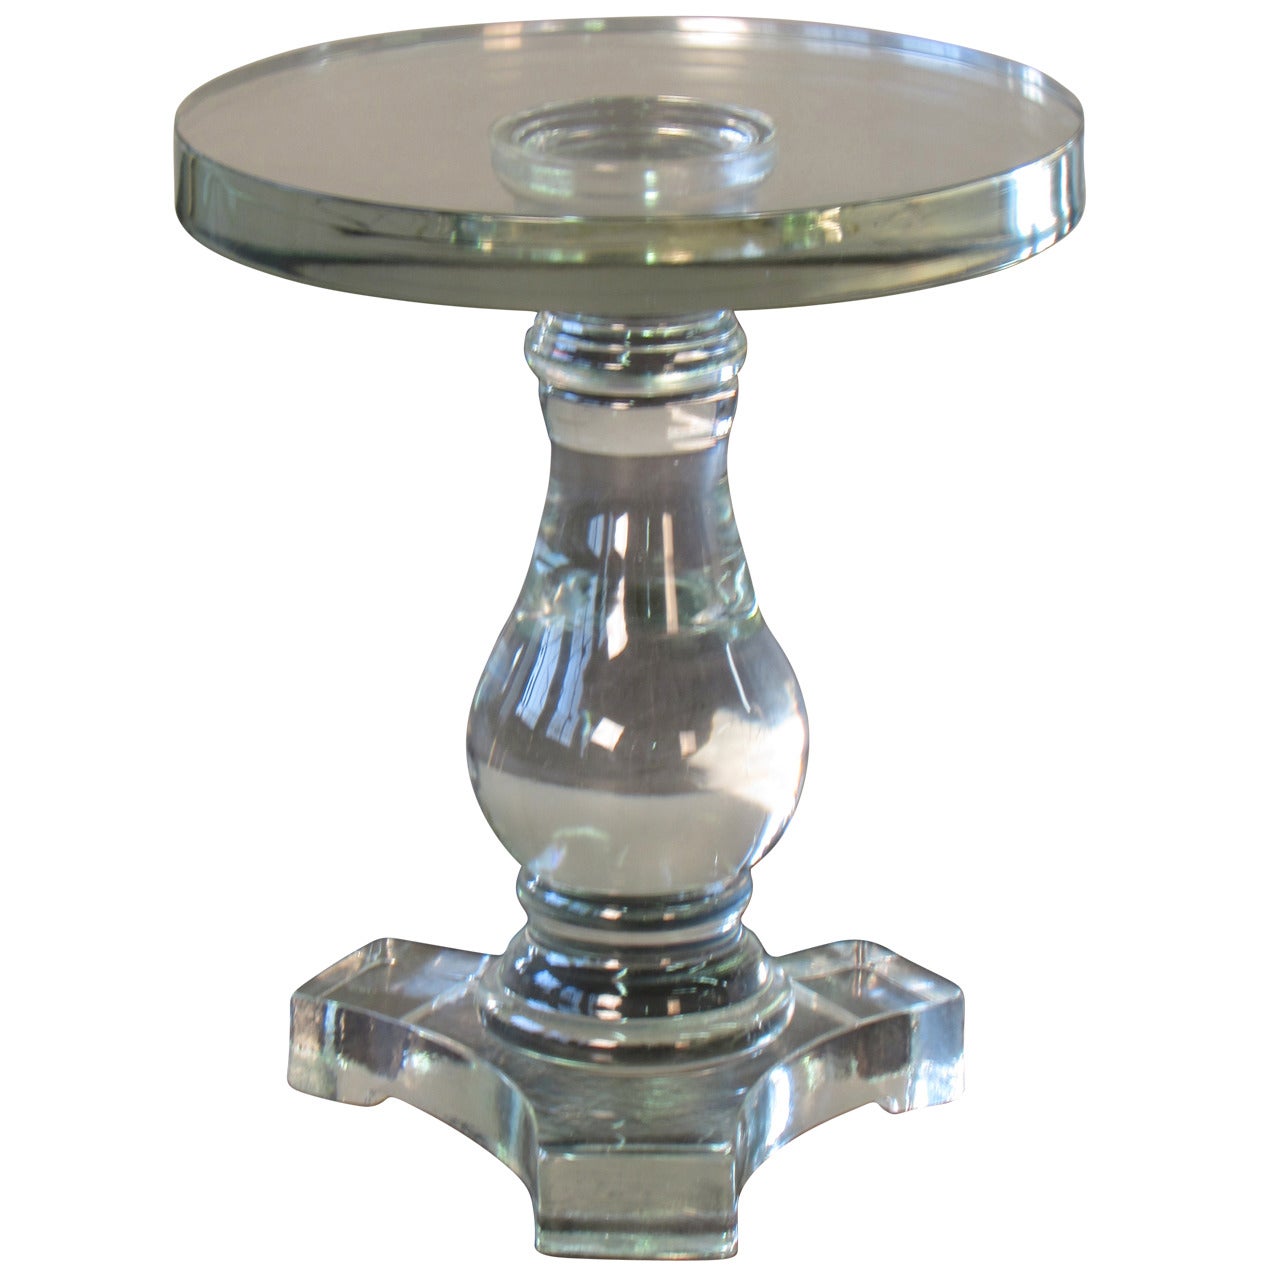 Beautiful Solid Murano Glass Baluster Table or Pedestal by Wicker Works